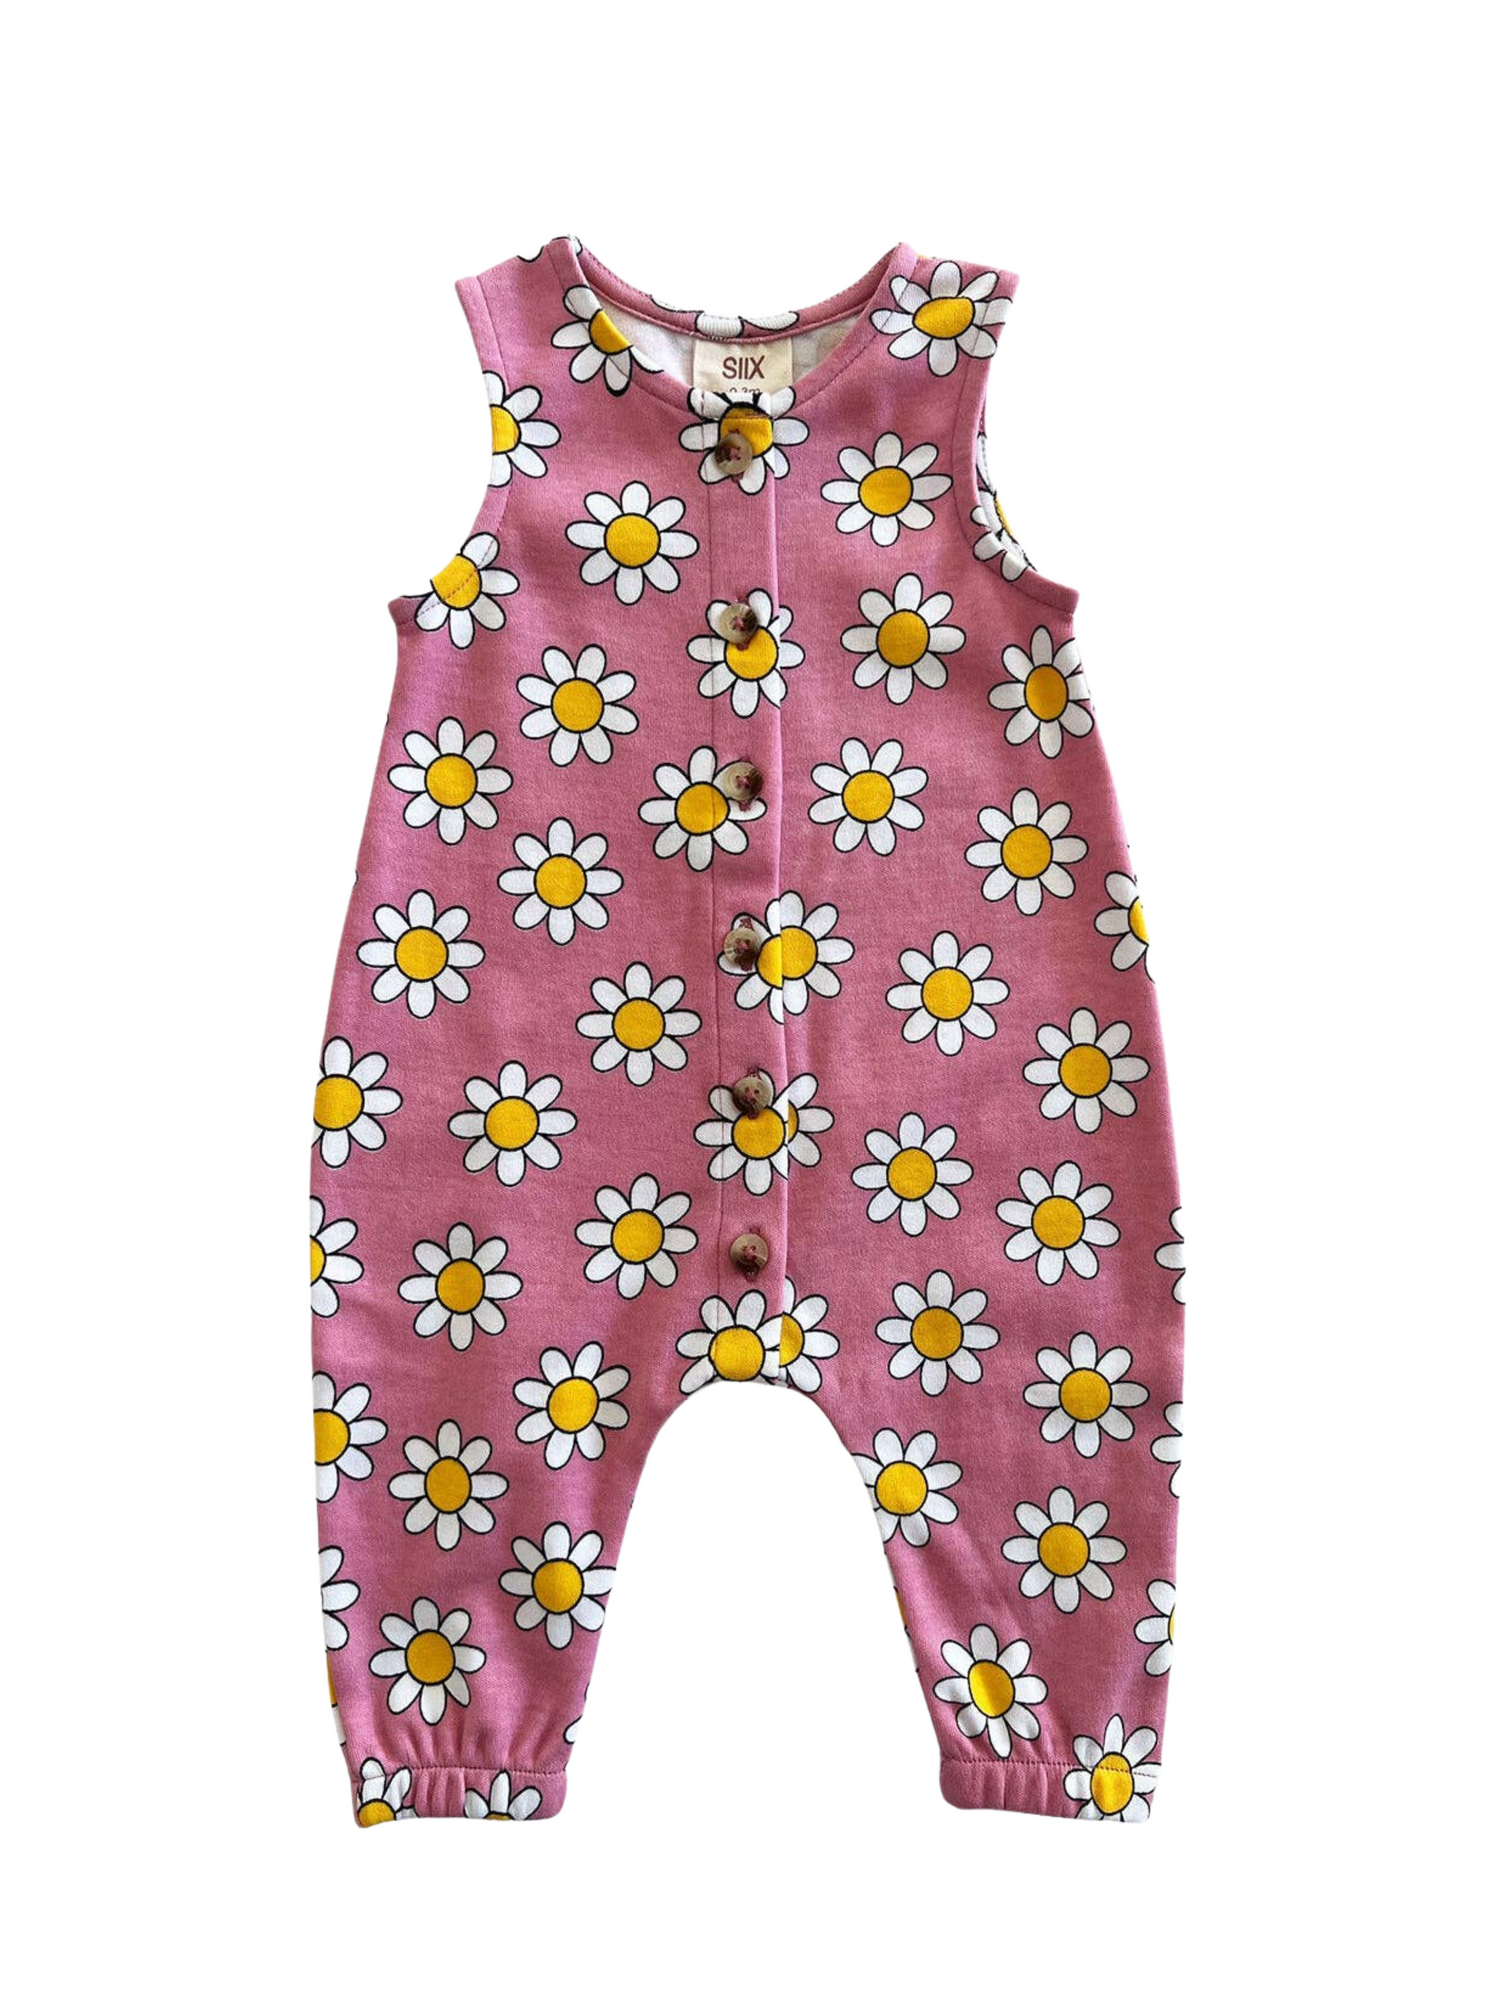 BABY GIRL UPSY DAISY JUMPSUIT - THE LITTLE EAGLE BOUTIQUE